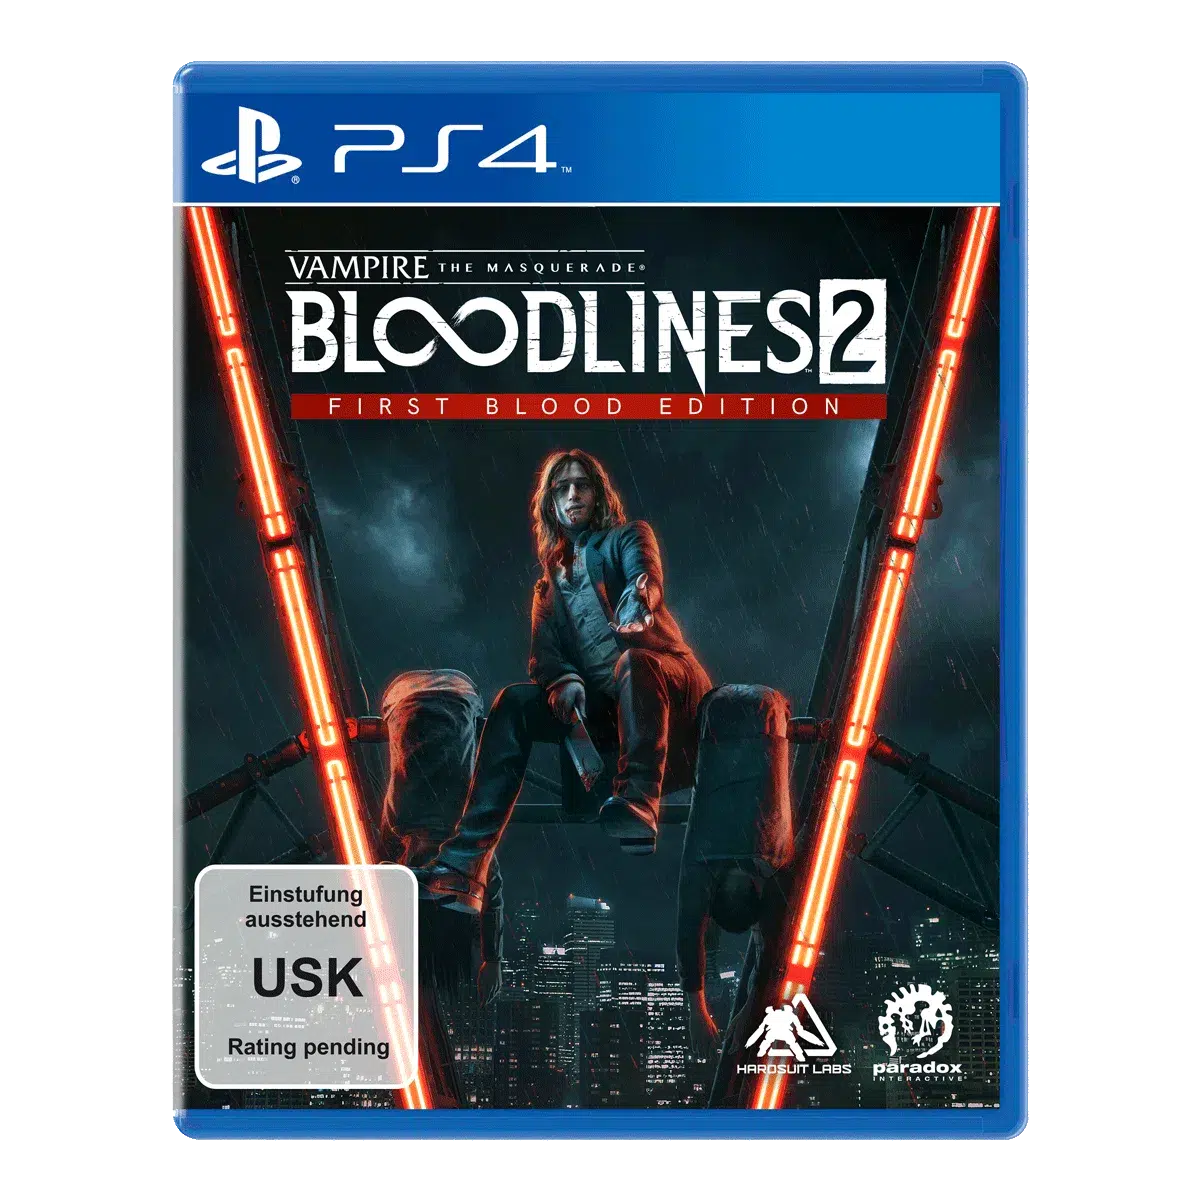 Vampire: The Masquerade Bloodlines 2 First Blood Edition (PS4)